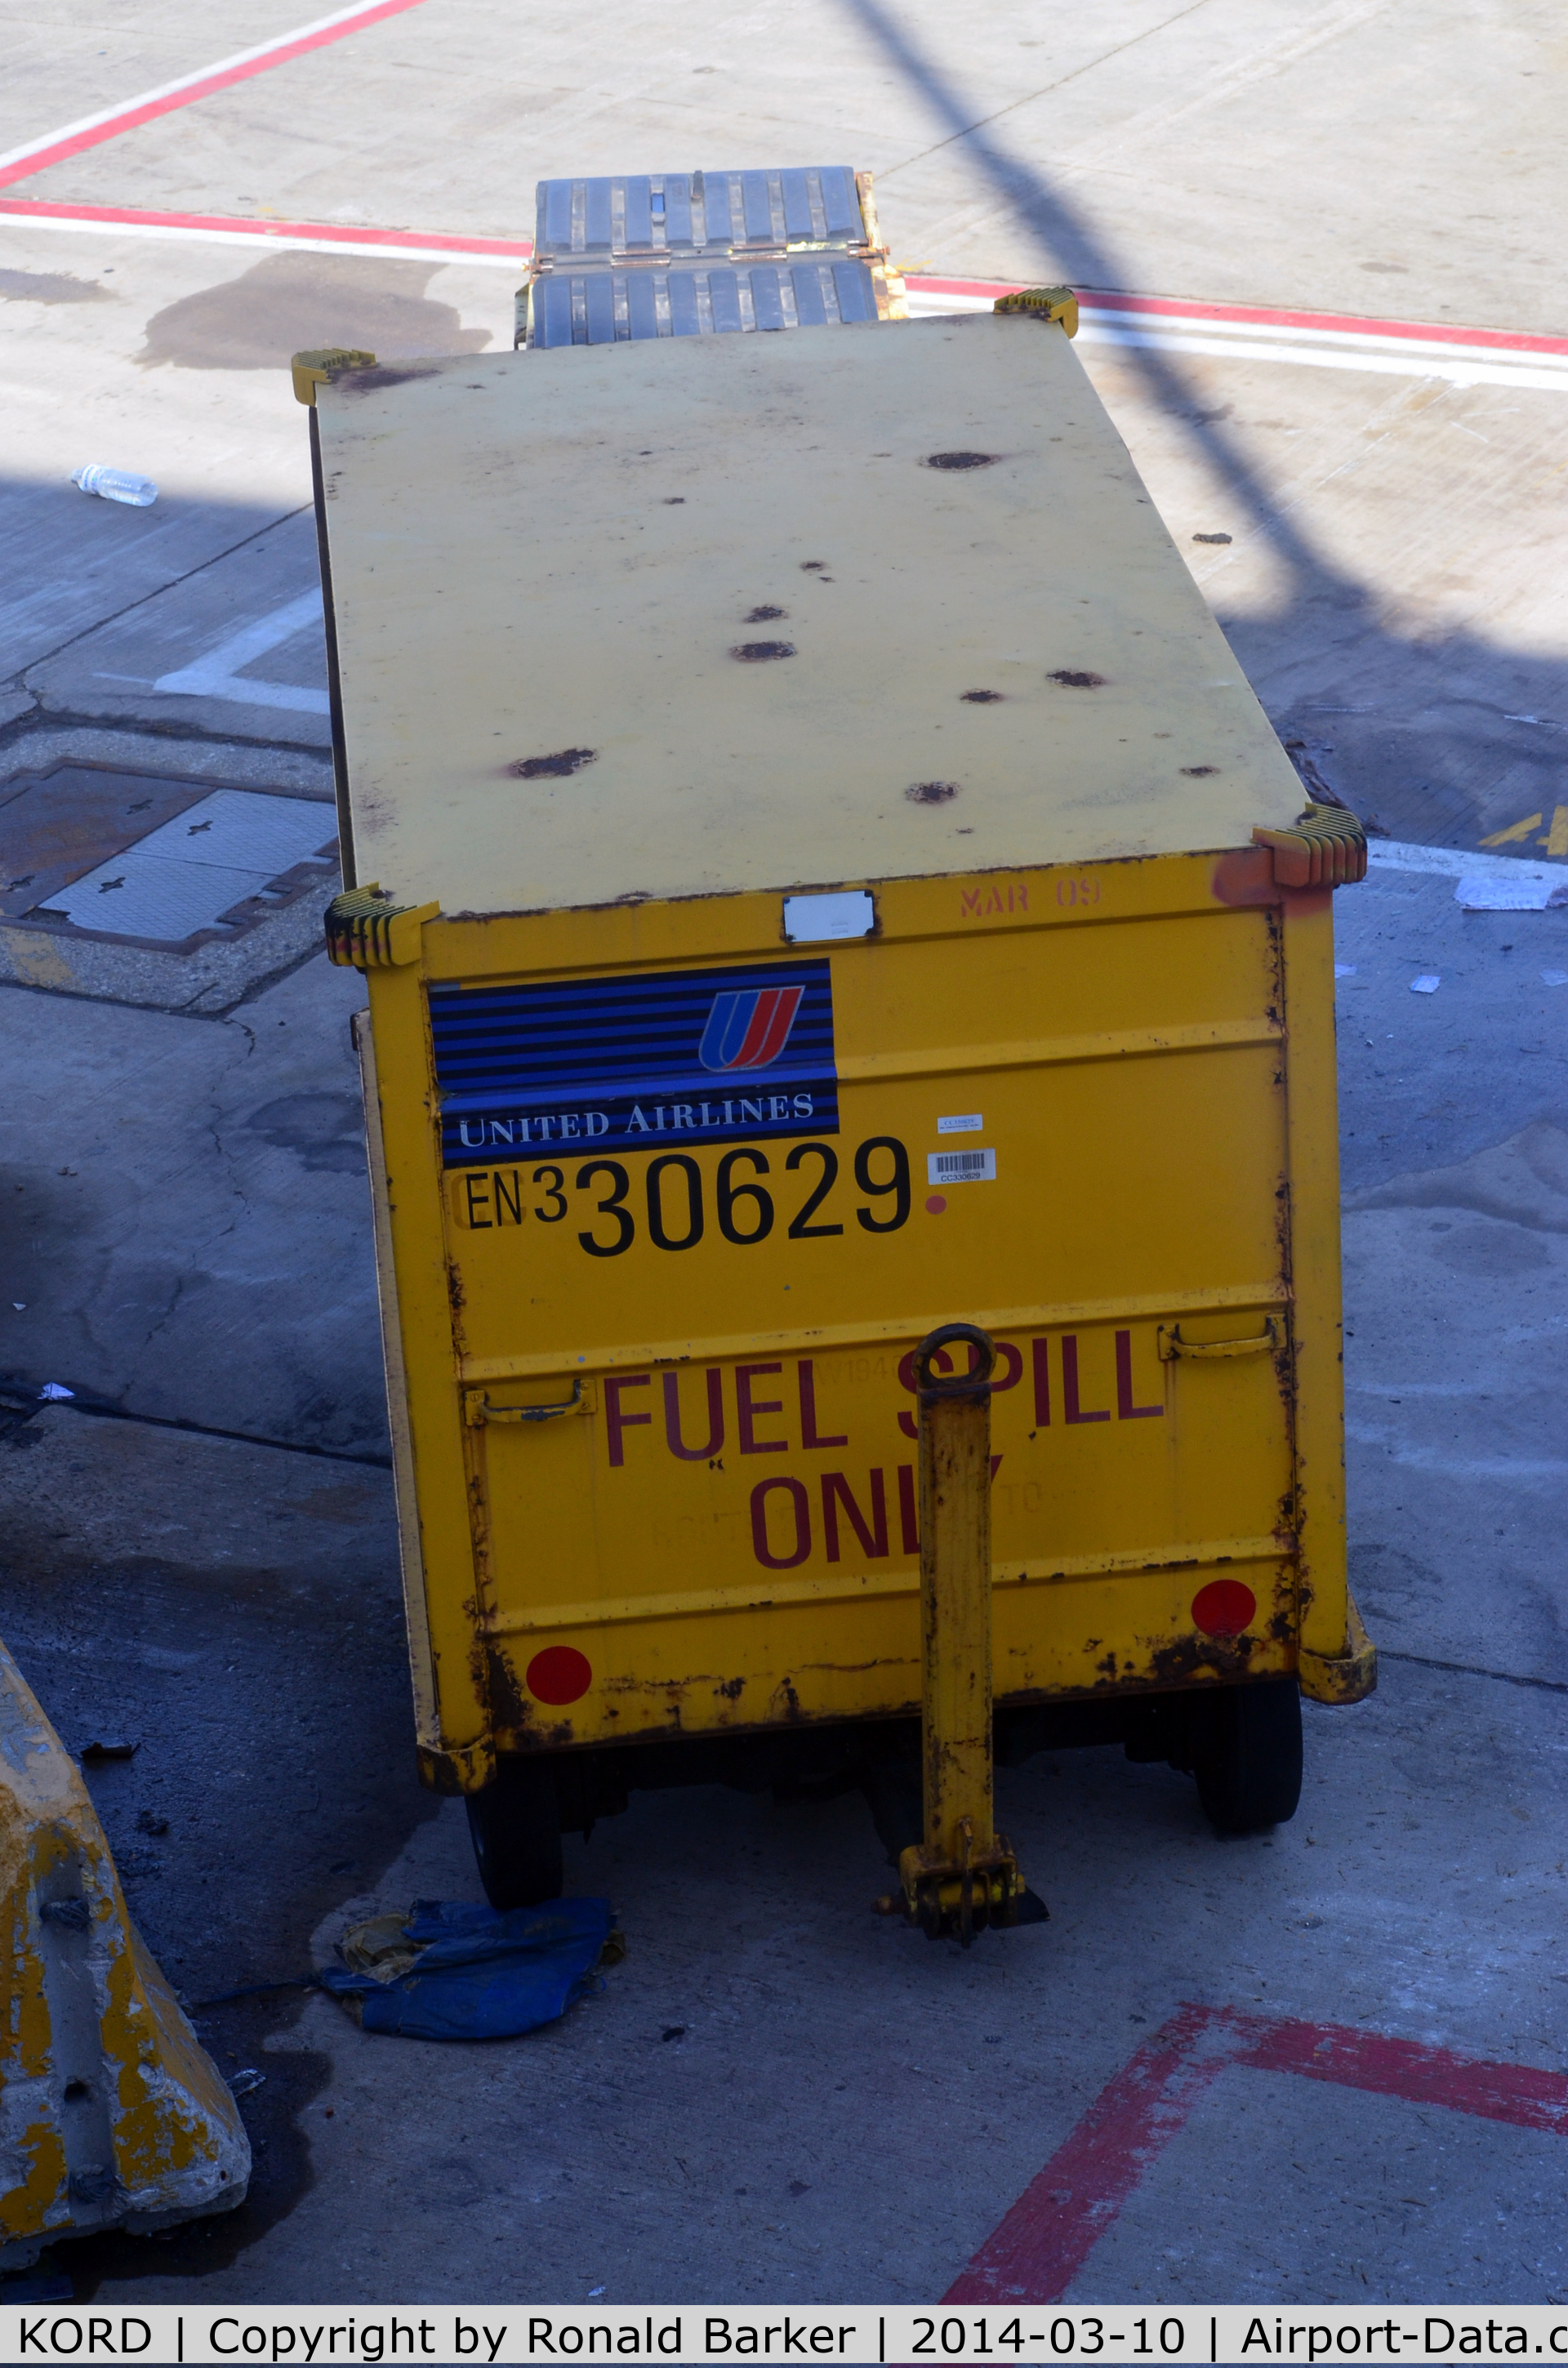 Chicago O'hare International Airport (ORD) - Fuel Spill clean up cart number 30629 at O'Hare